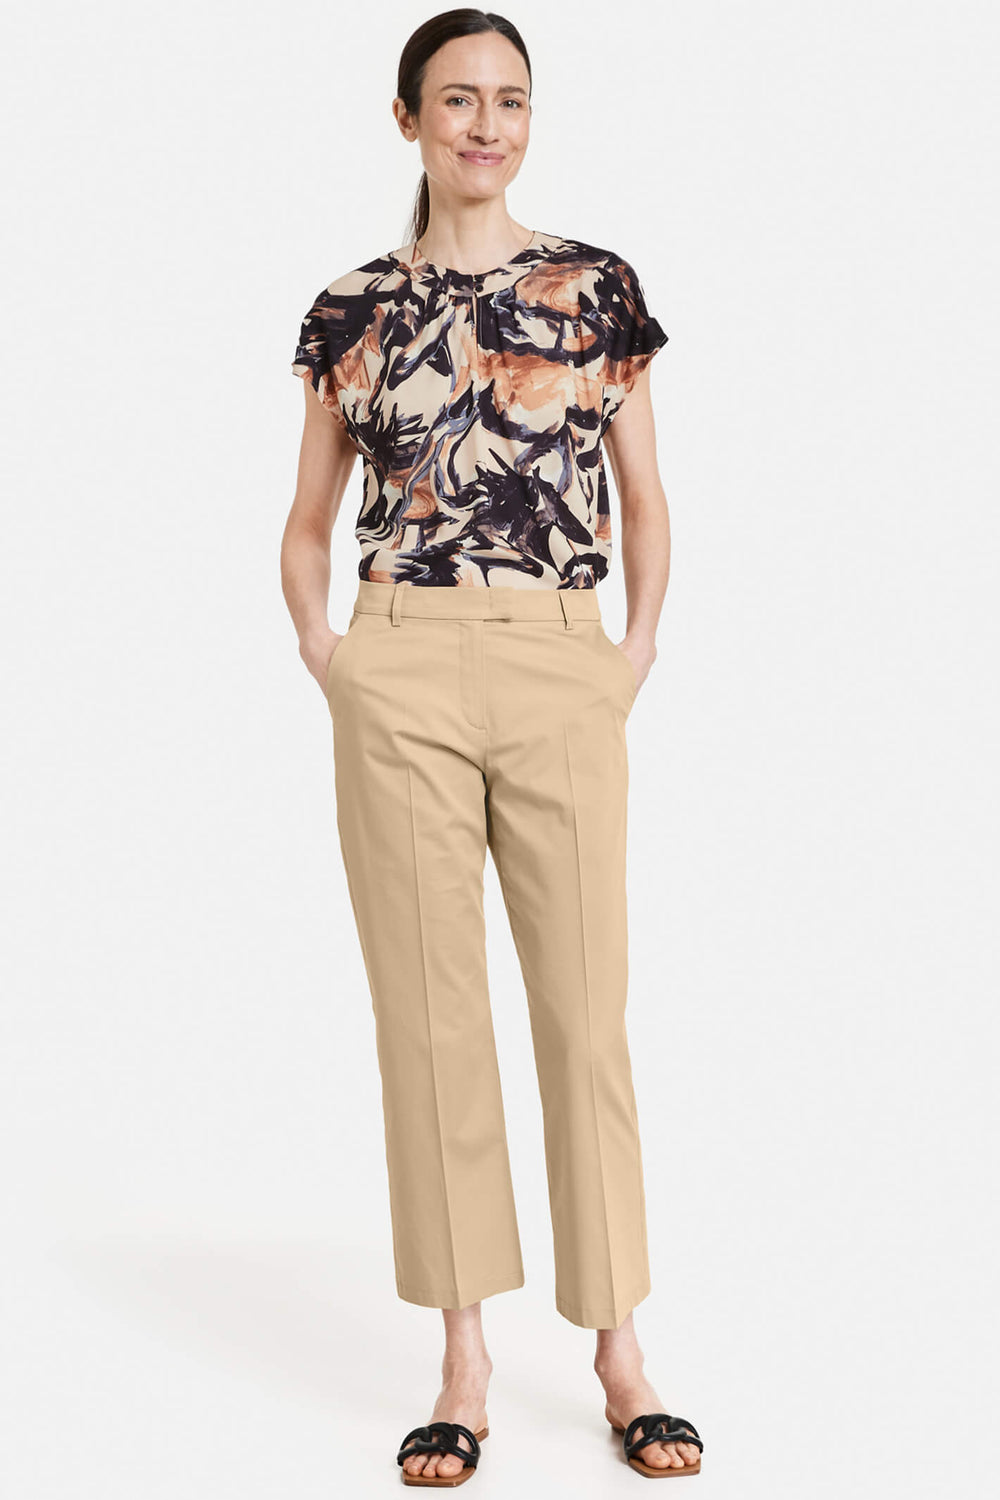 Gerry Weber 120020 Caramel Trousers - Experience Boutique